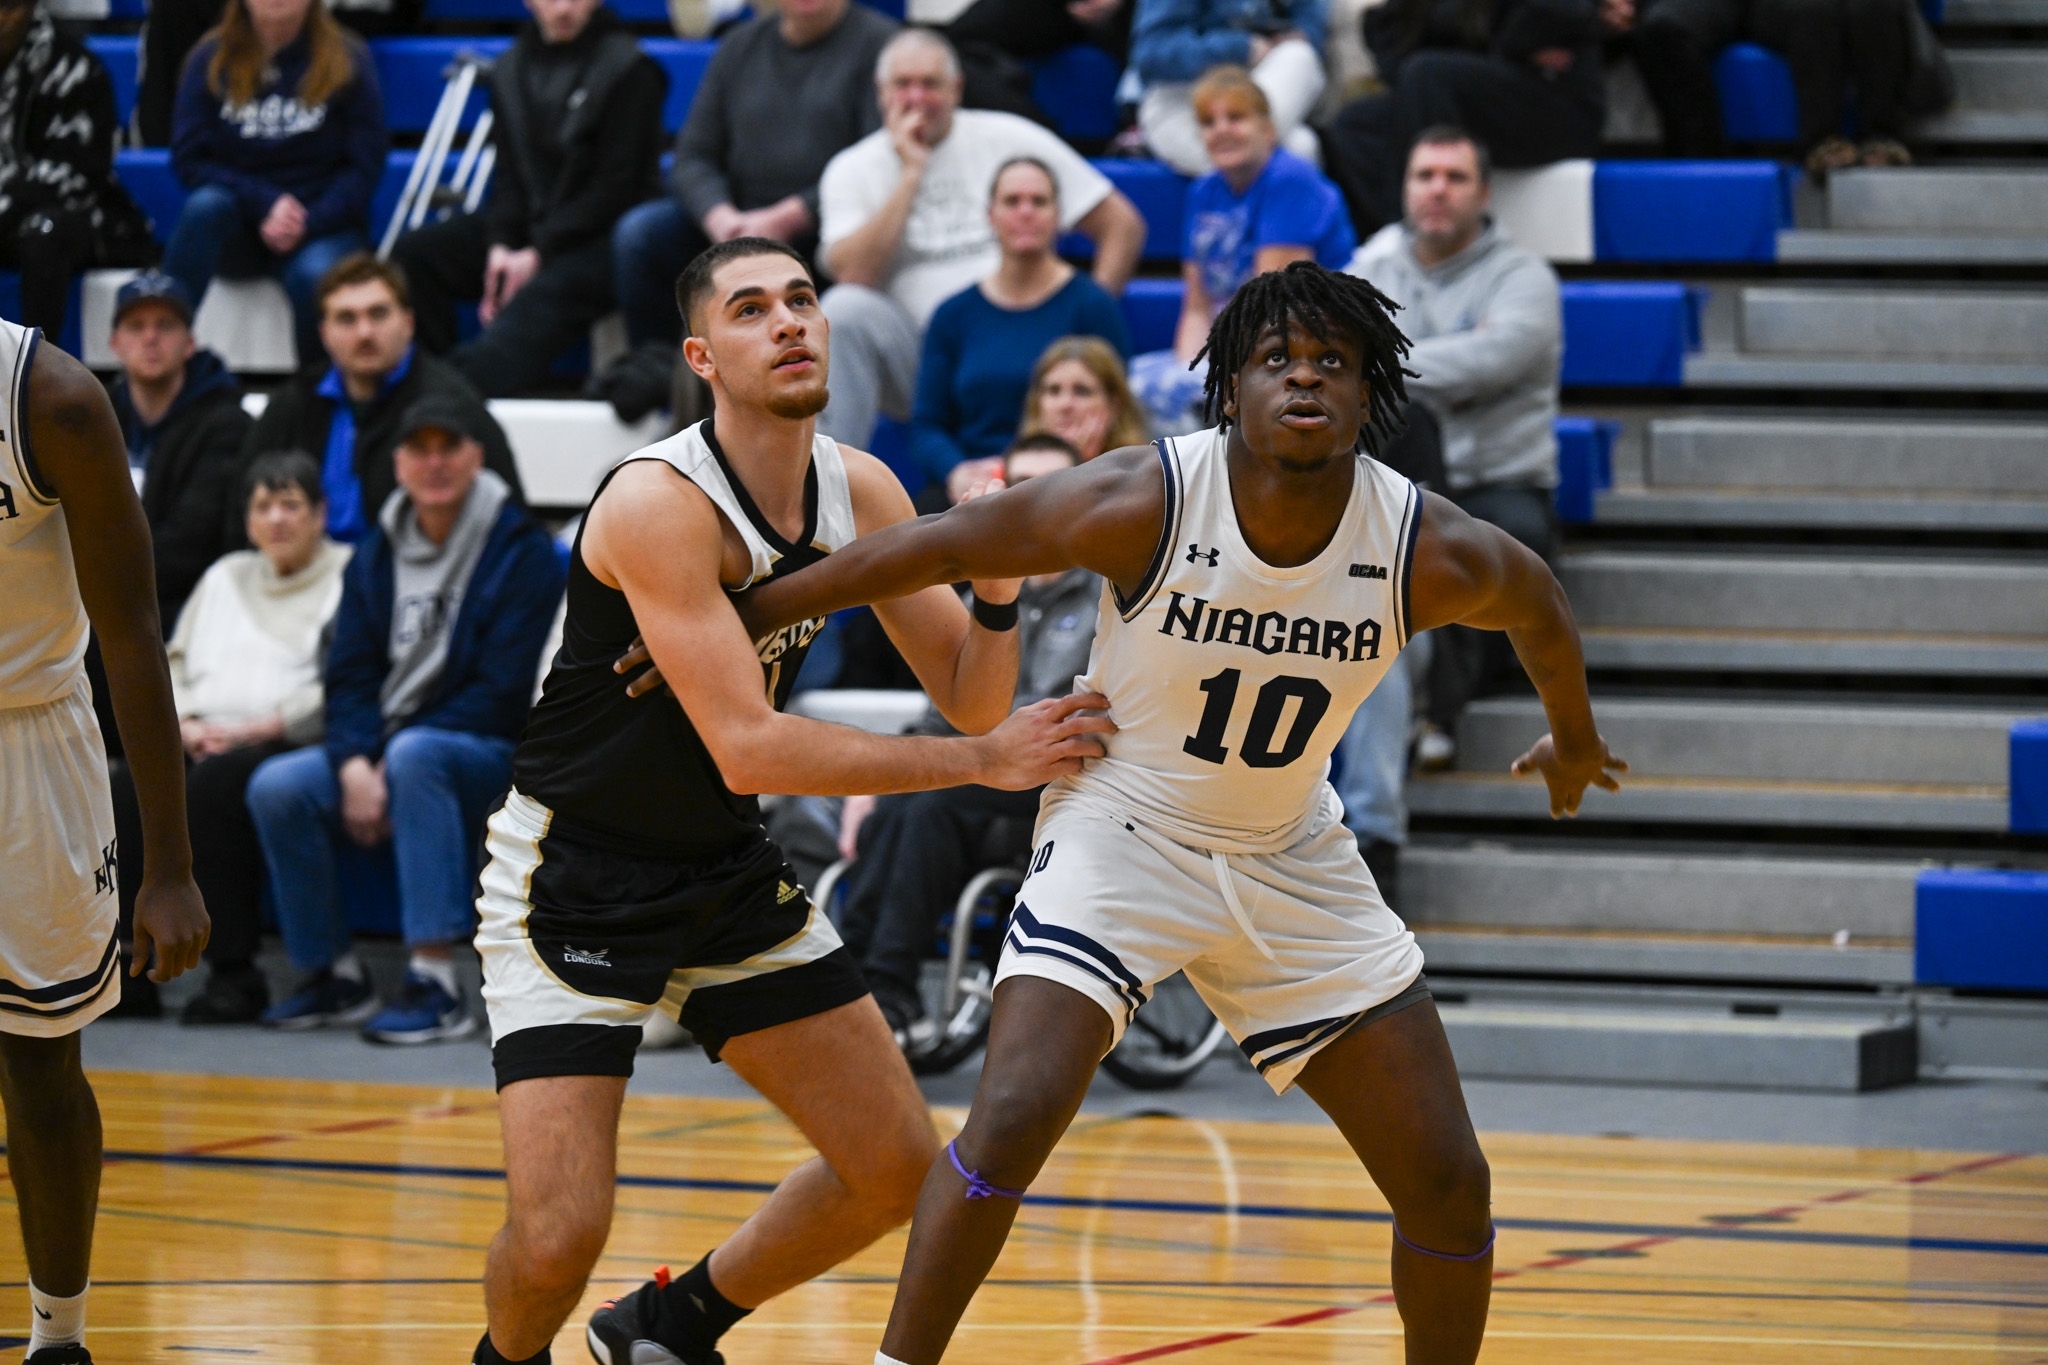 Knights men’s basketball find victory over visiting Condors